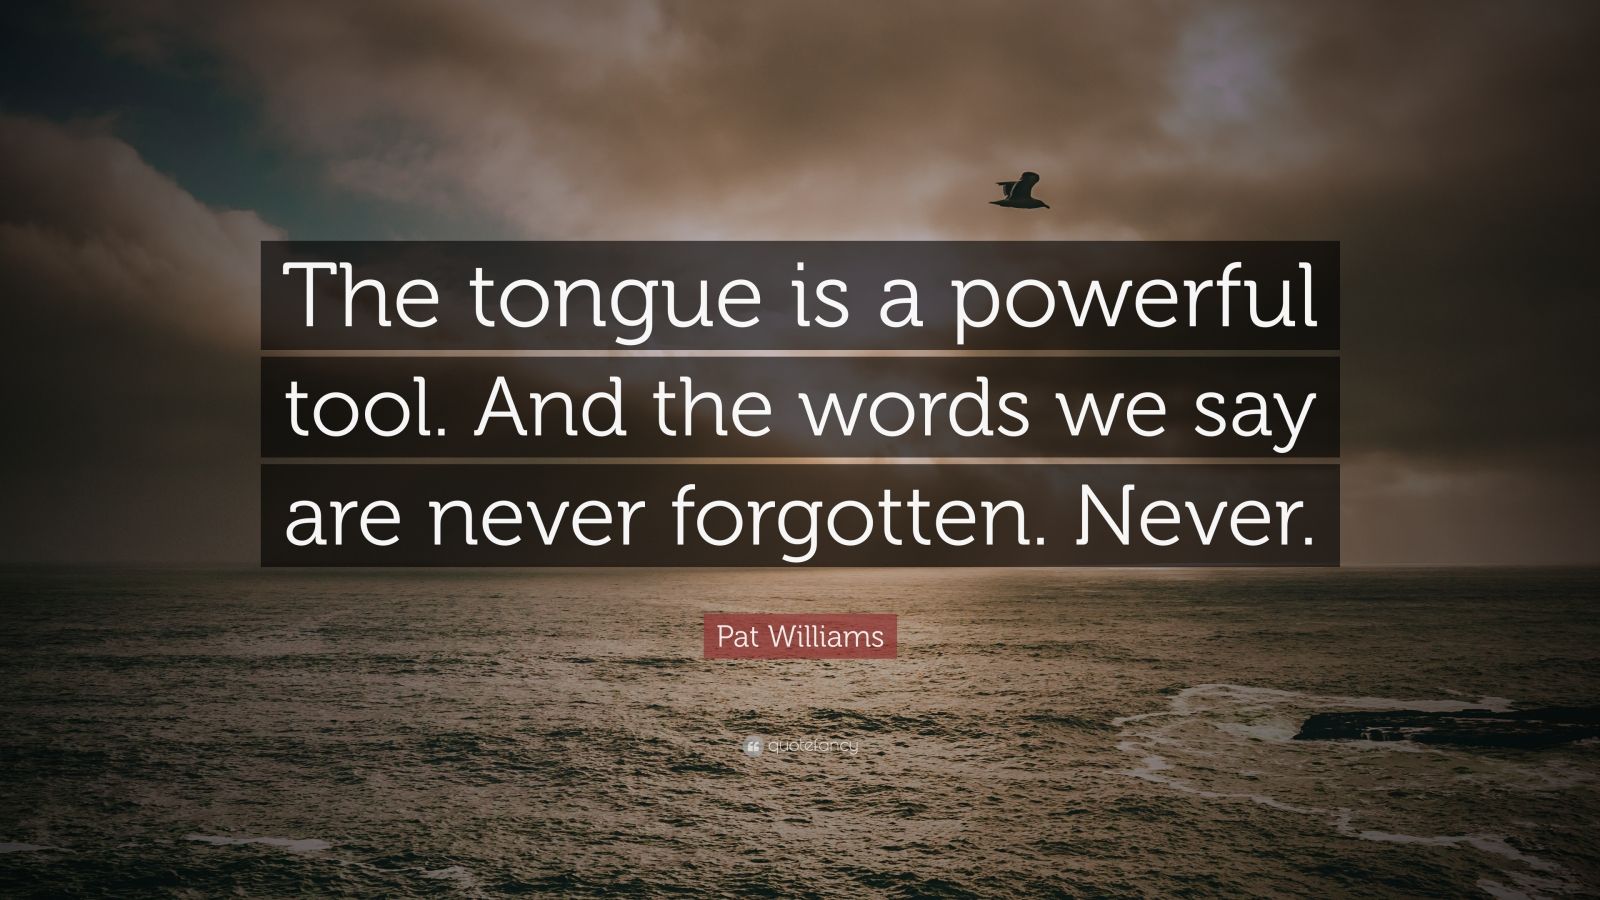 Pat Williams Quote: “The tongue is a powerful tool. And the words we